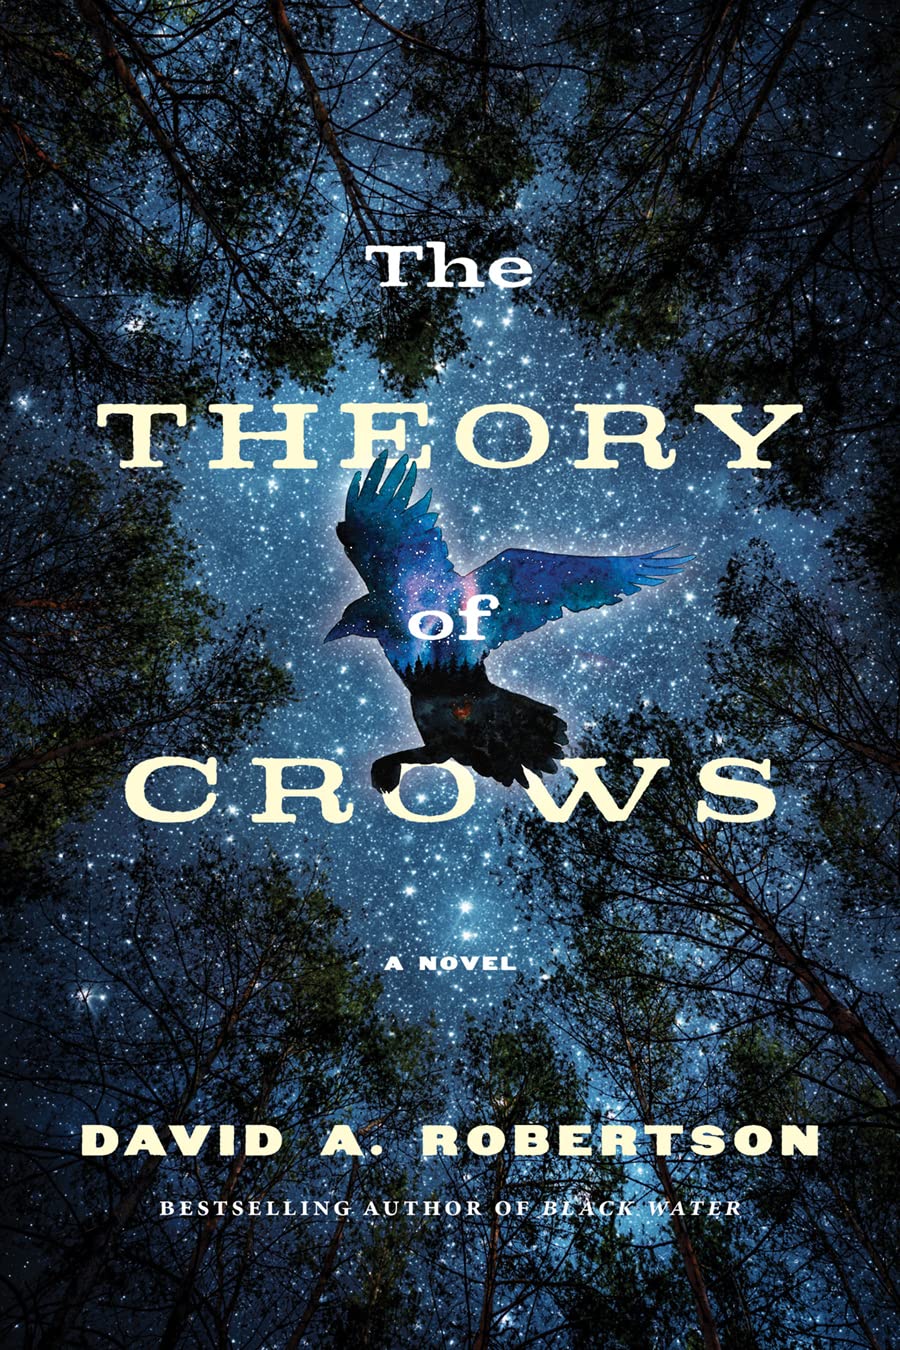 The Theory of Crows [David A. Robertson]